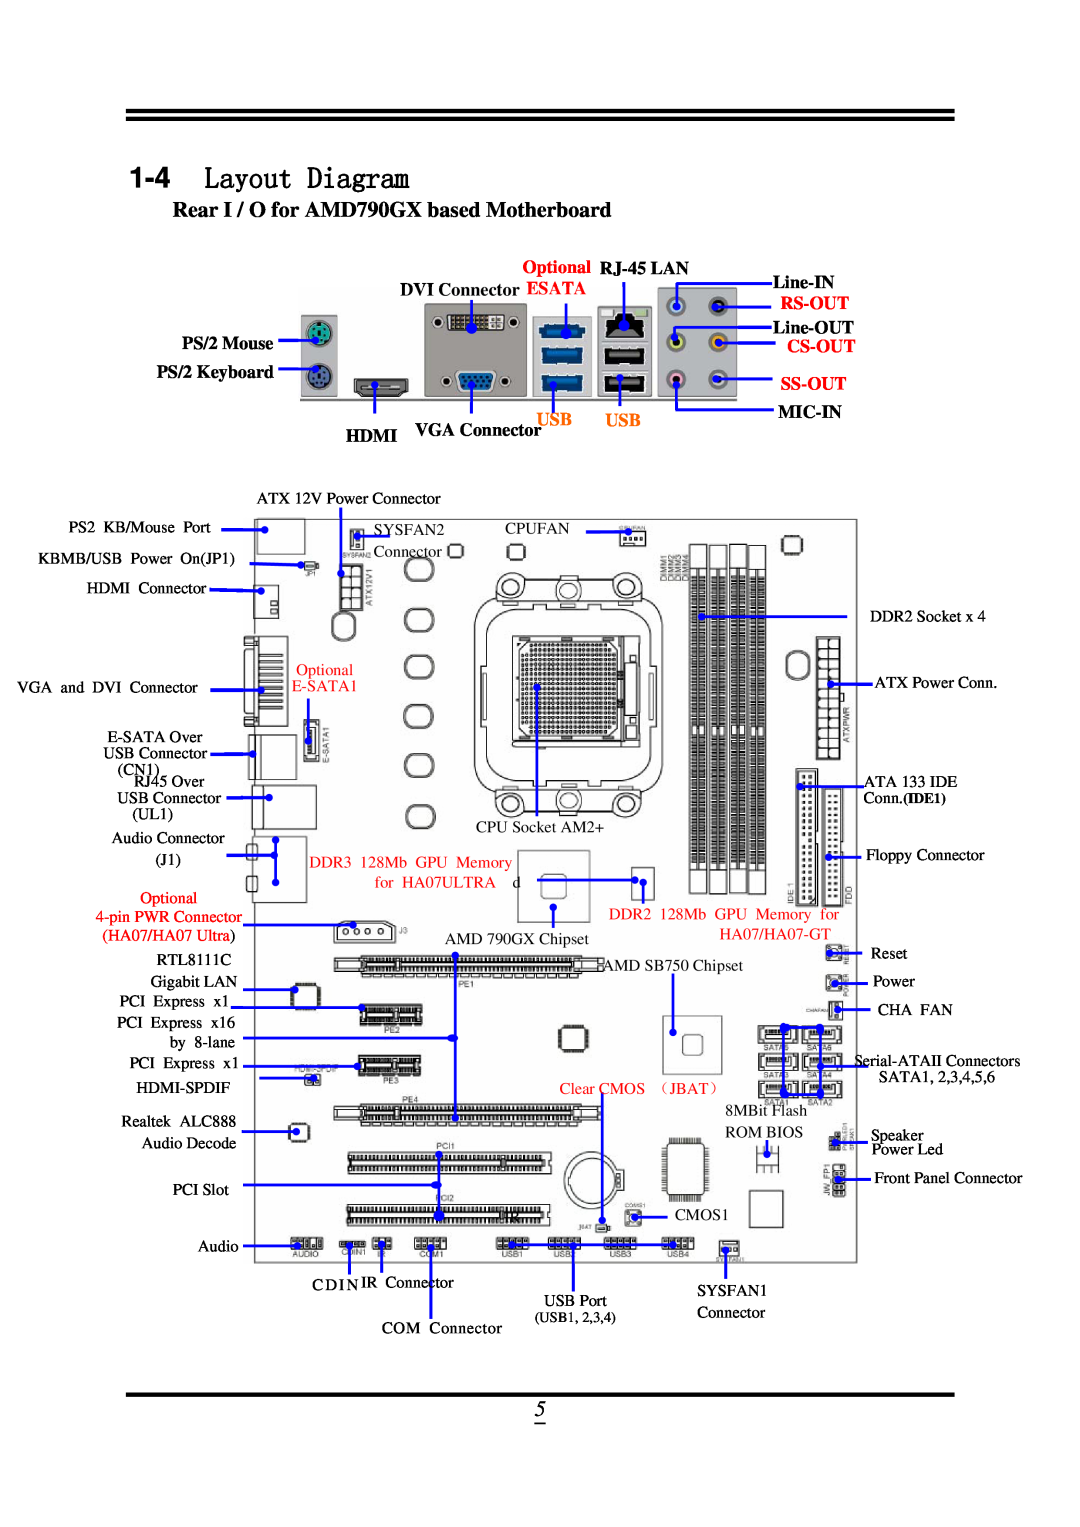 AMD Rear I / O for AMD790GX based Motherboard, Layout Diagram, Optional RJ-45 LAN, Rs-Out, Cs-Out, Ss-Out, E-SATA1 